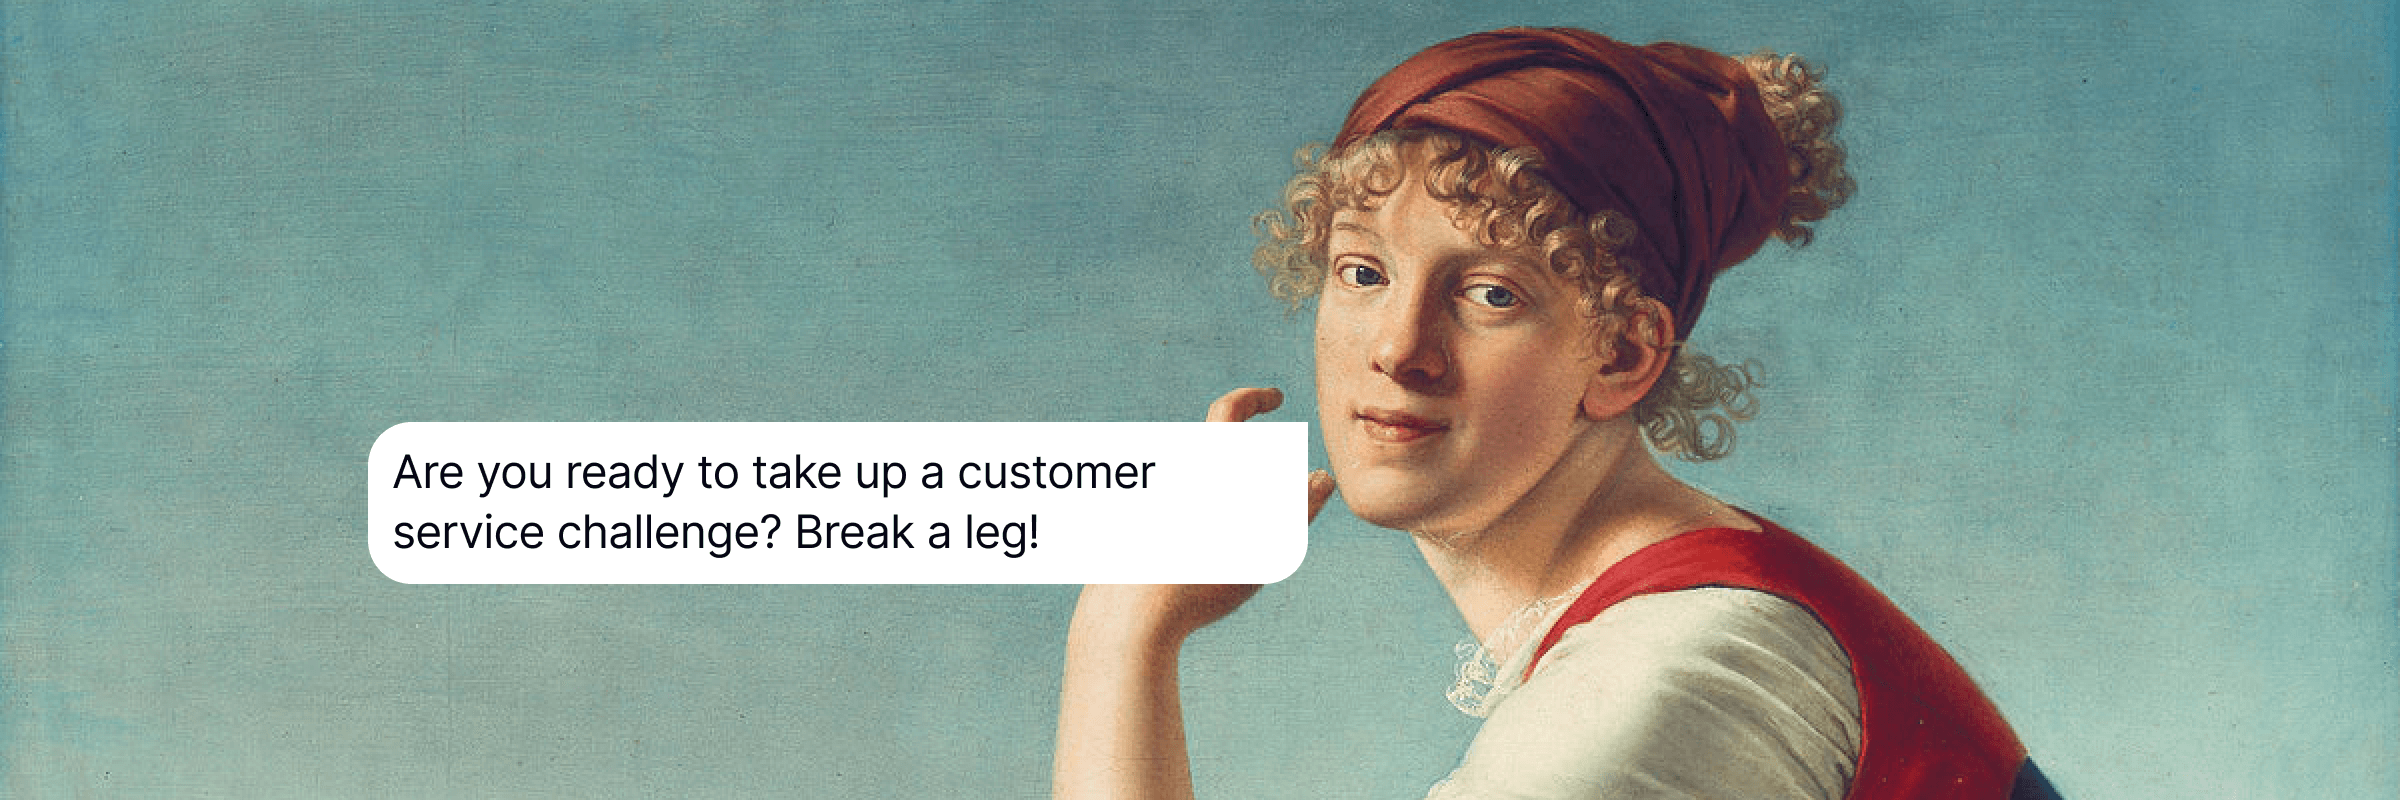 8 Customer Service Challenges Harming Your Bottom Line [+ How to Conquer Them]